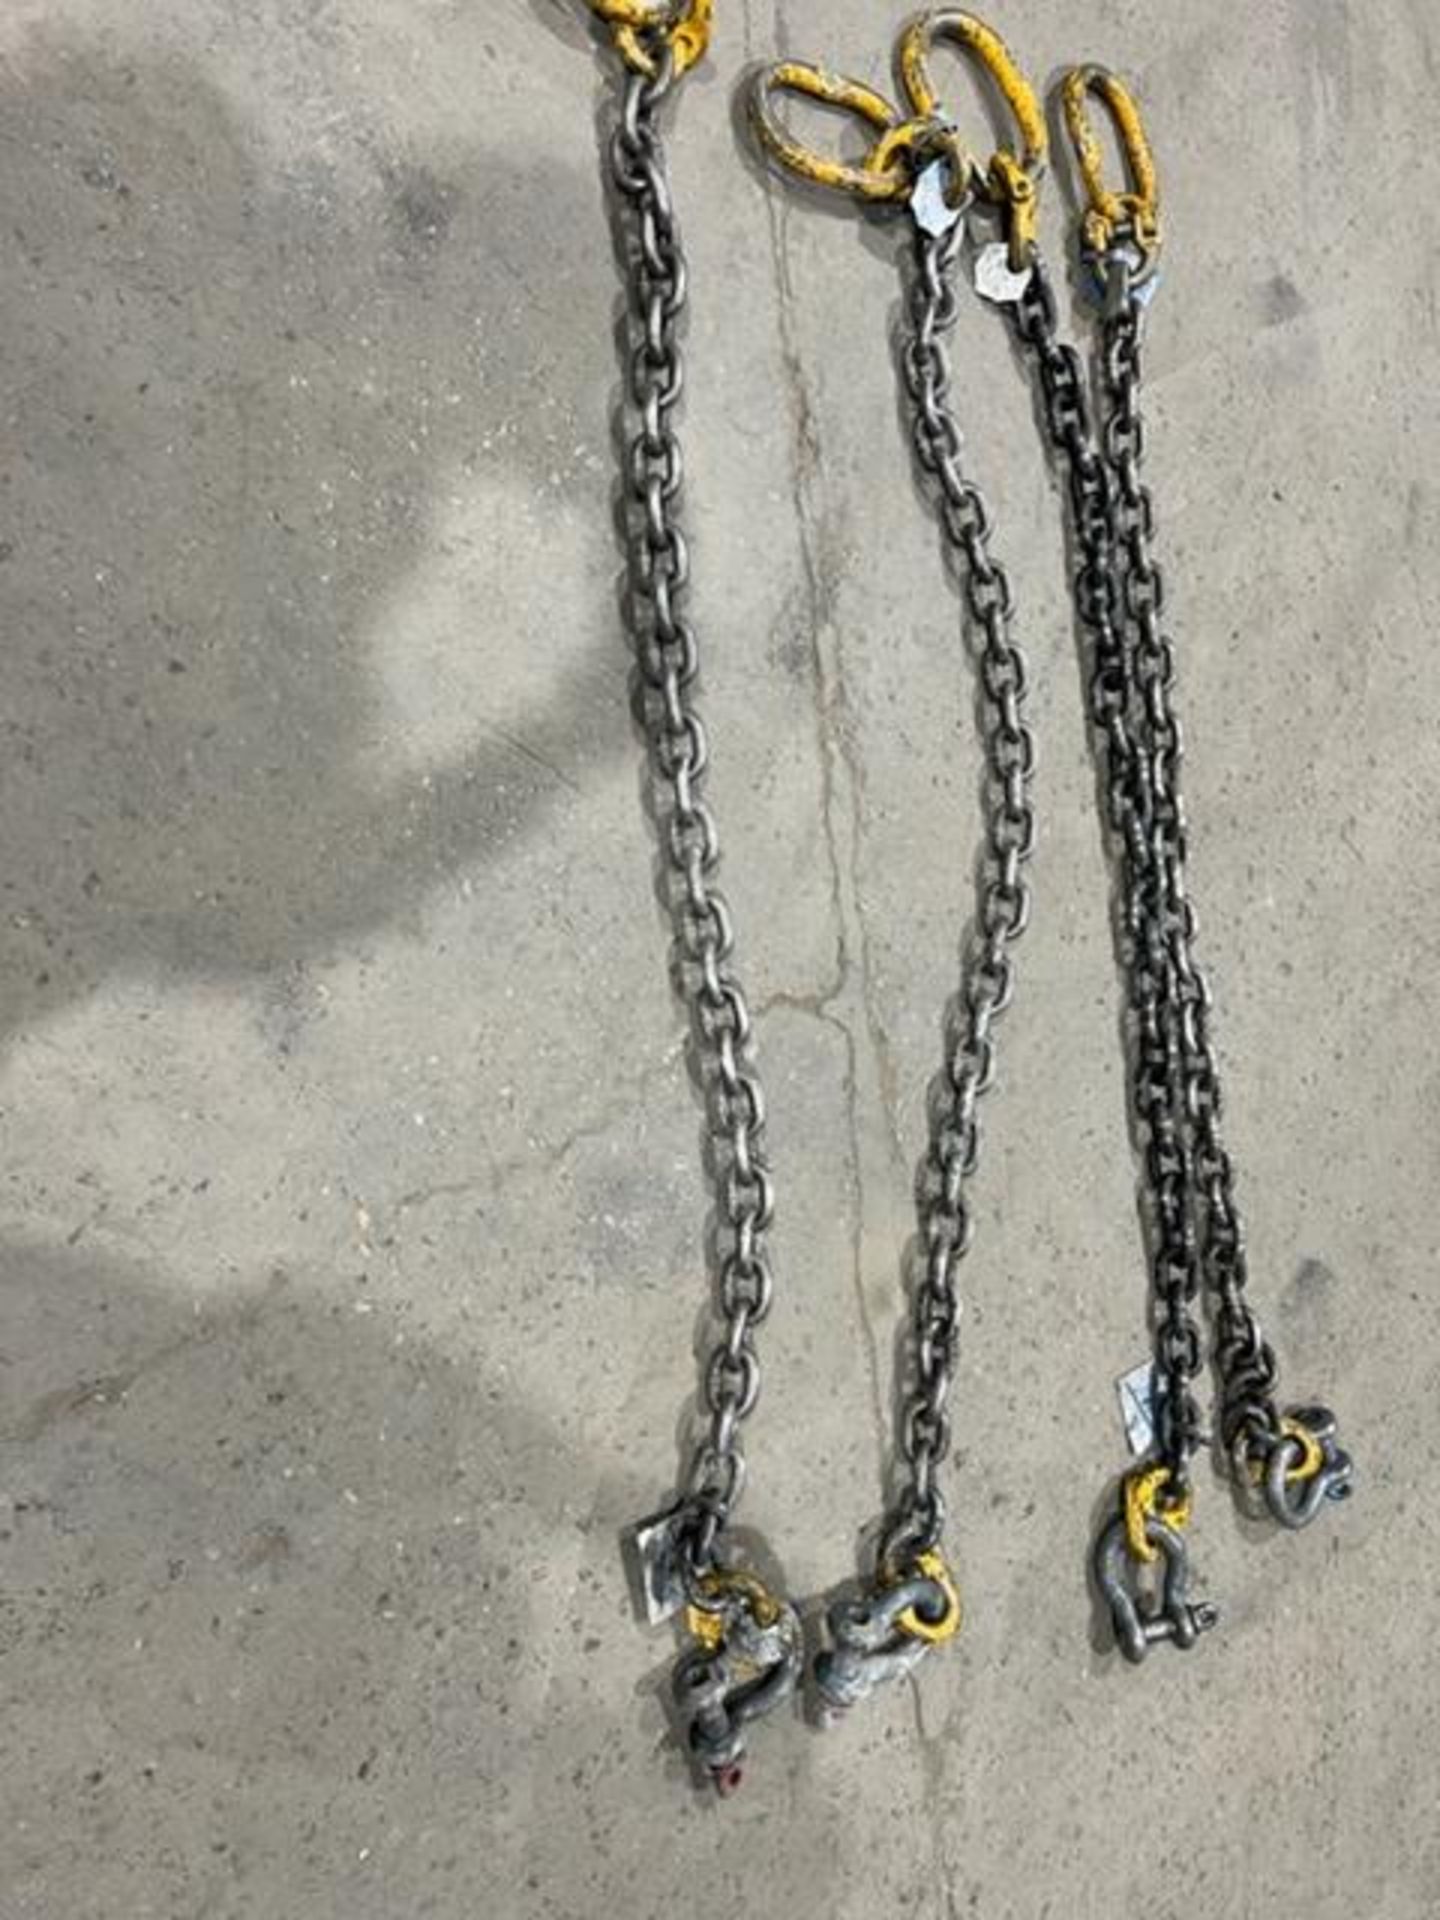 Lot of 4 Lifting Chain 8 ton Each Hook with Shakels *** FROM 5-STAR RIGGING